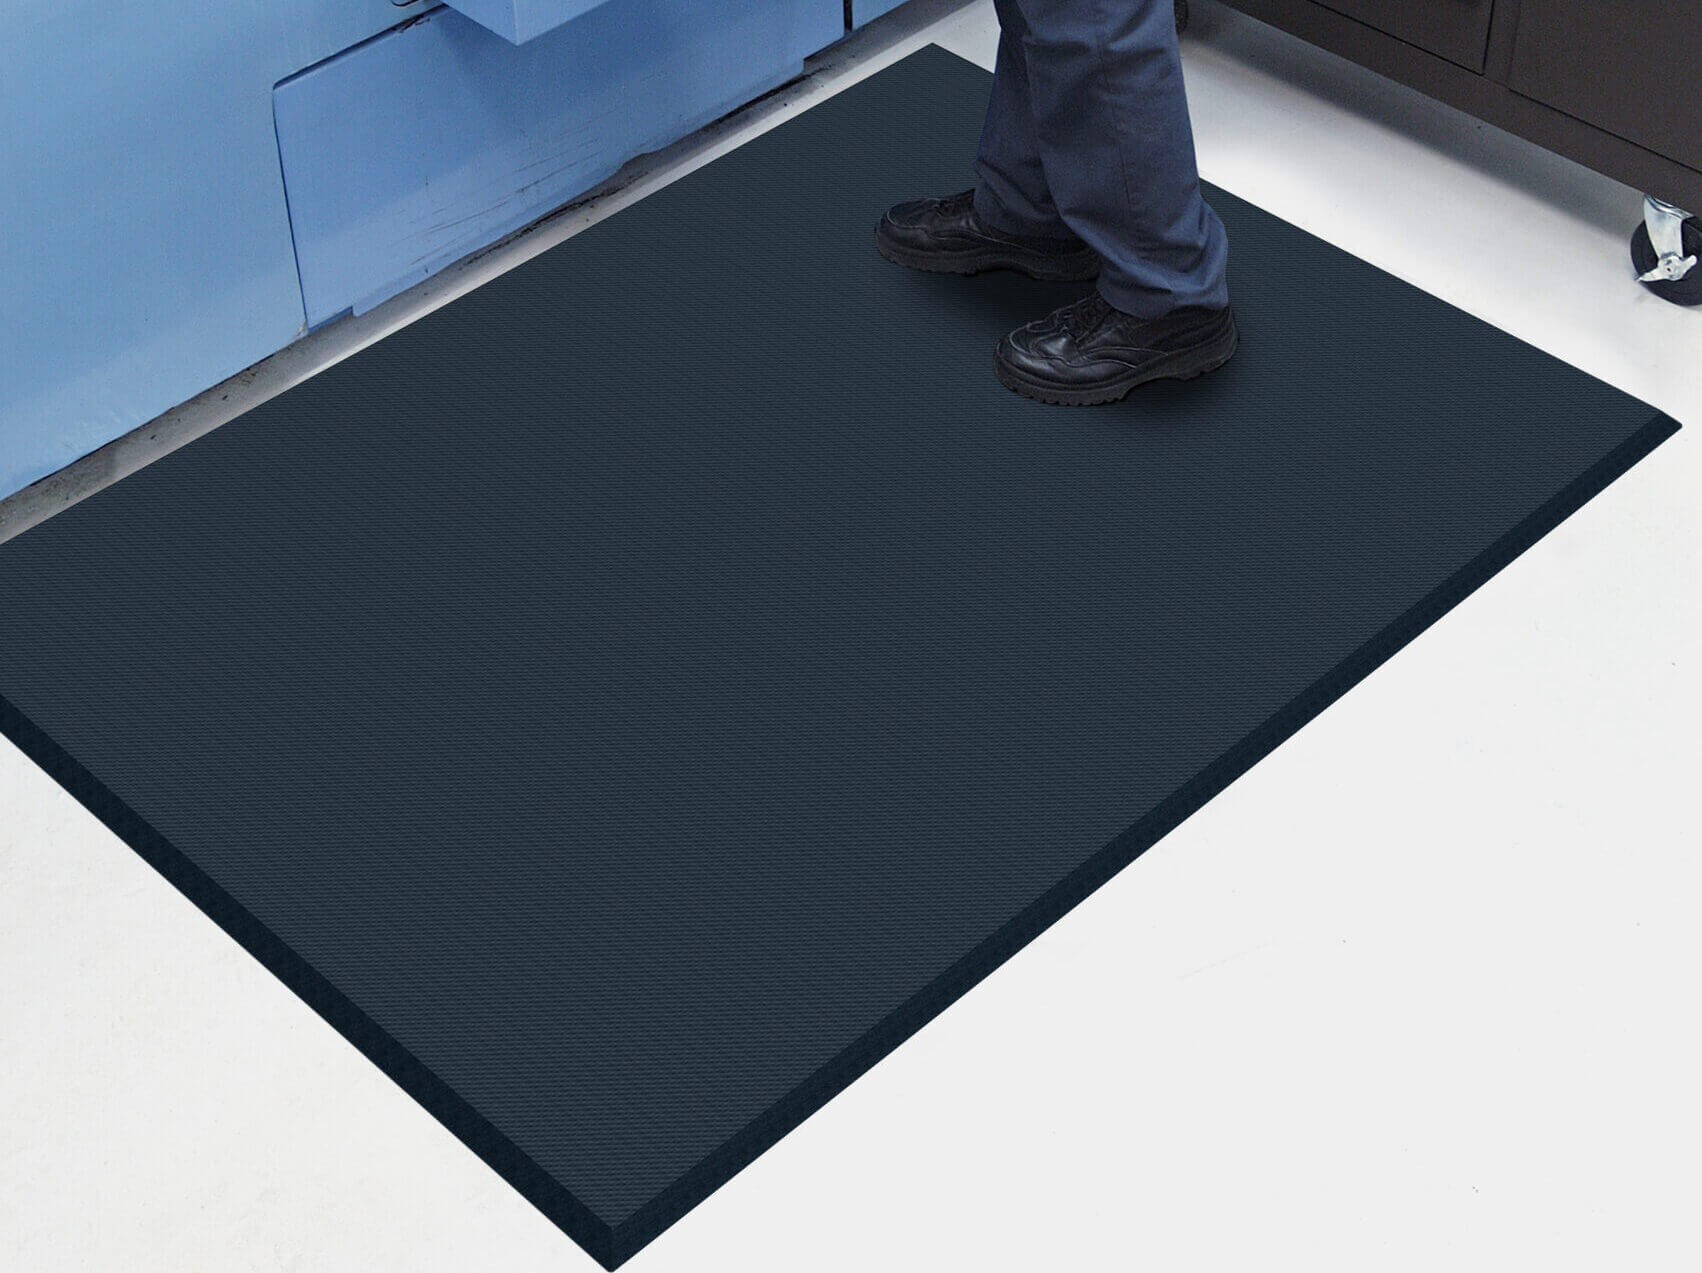 someone standing on an anti-fatique mat